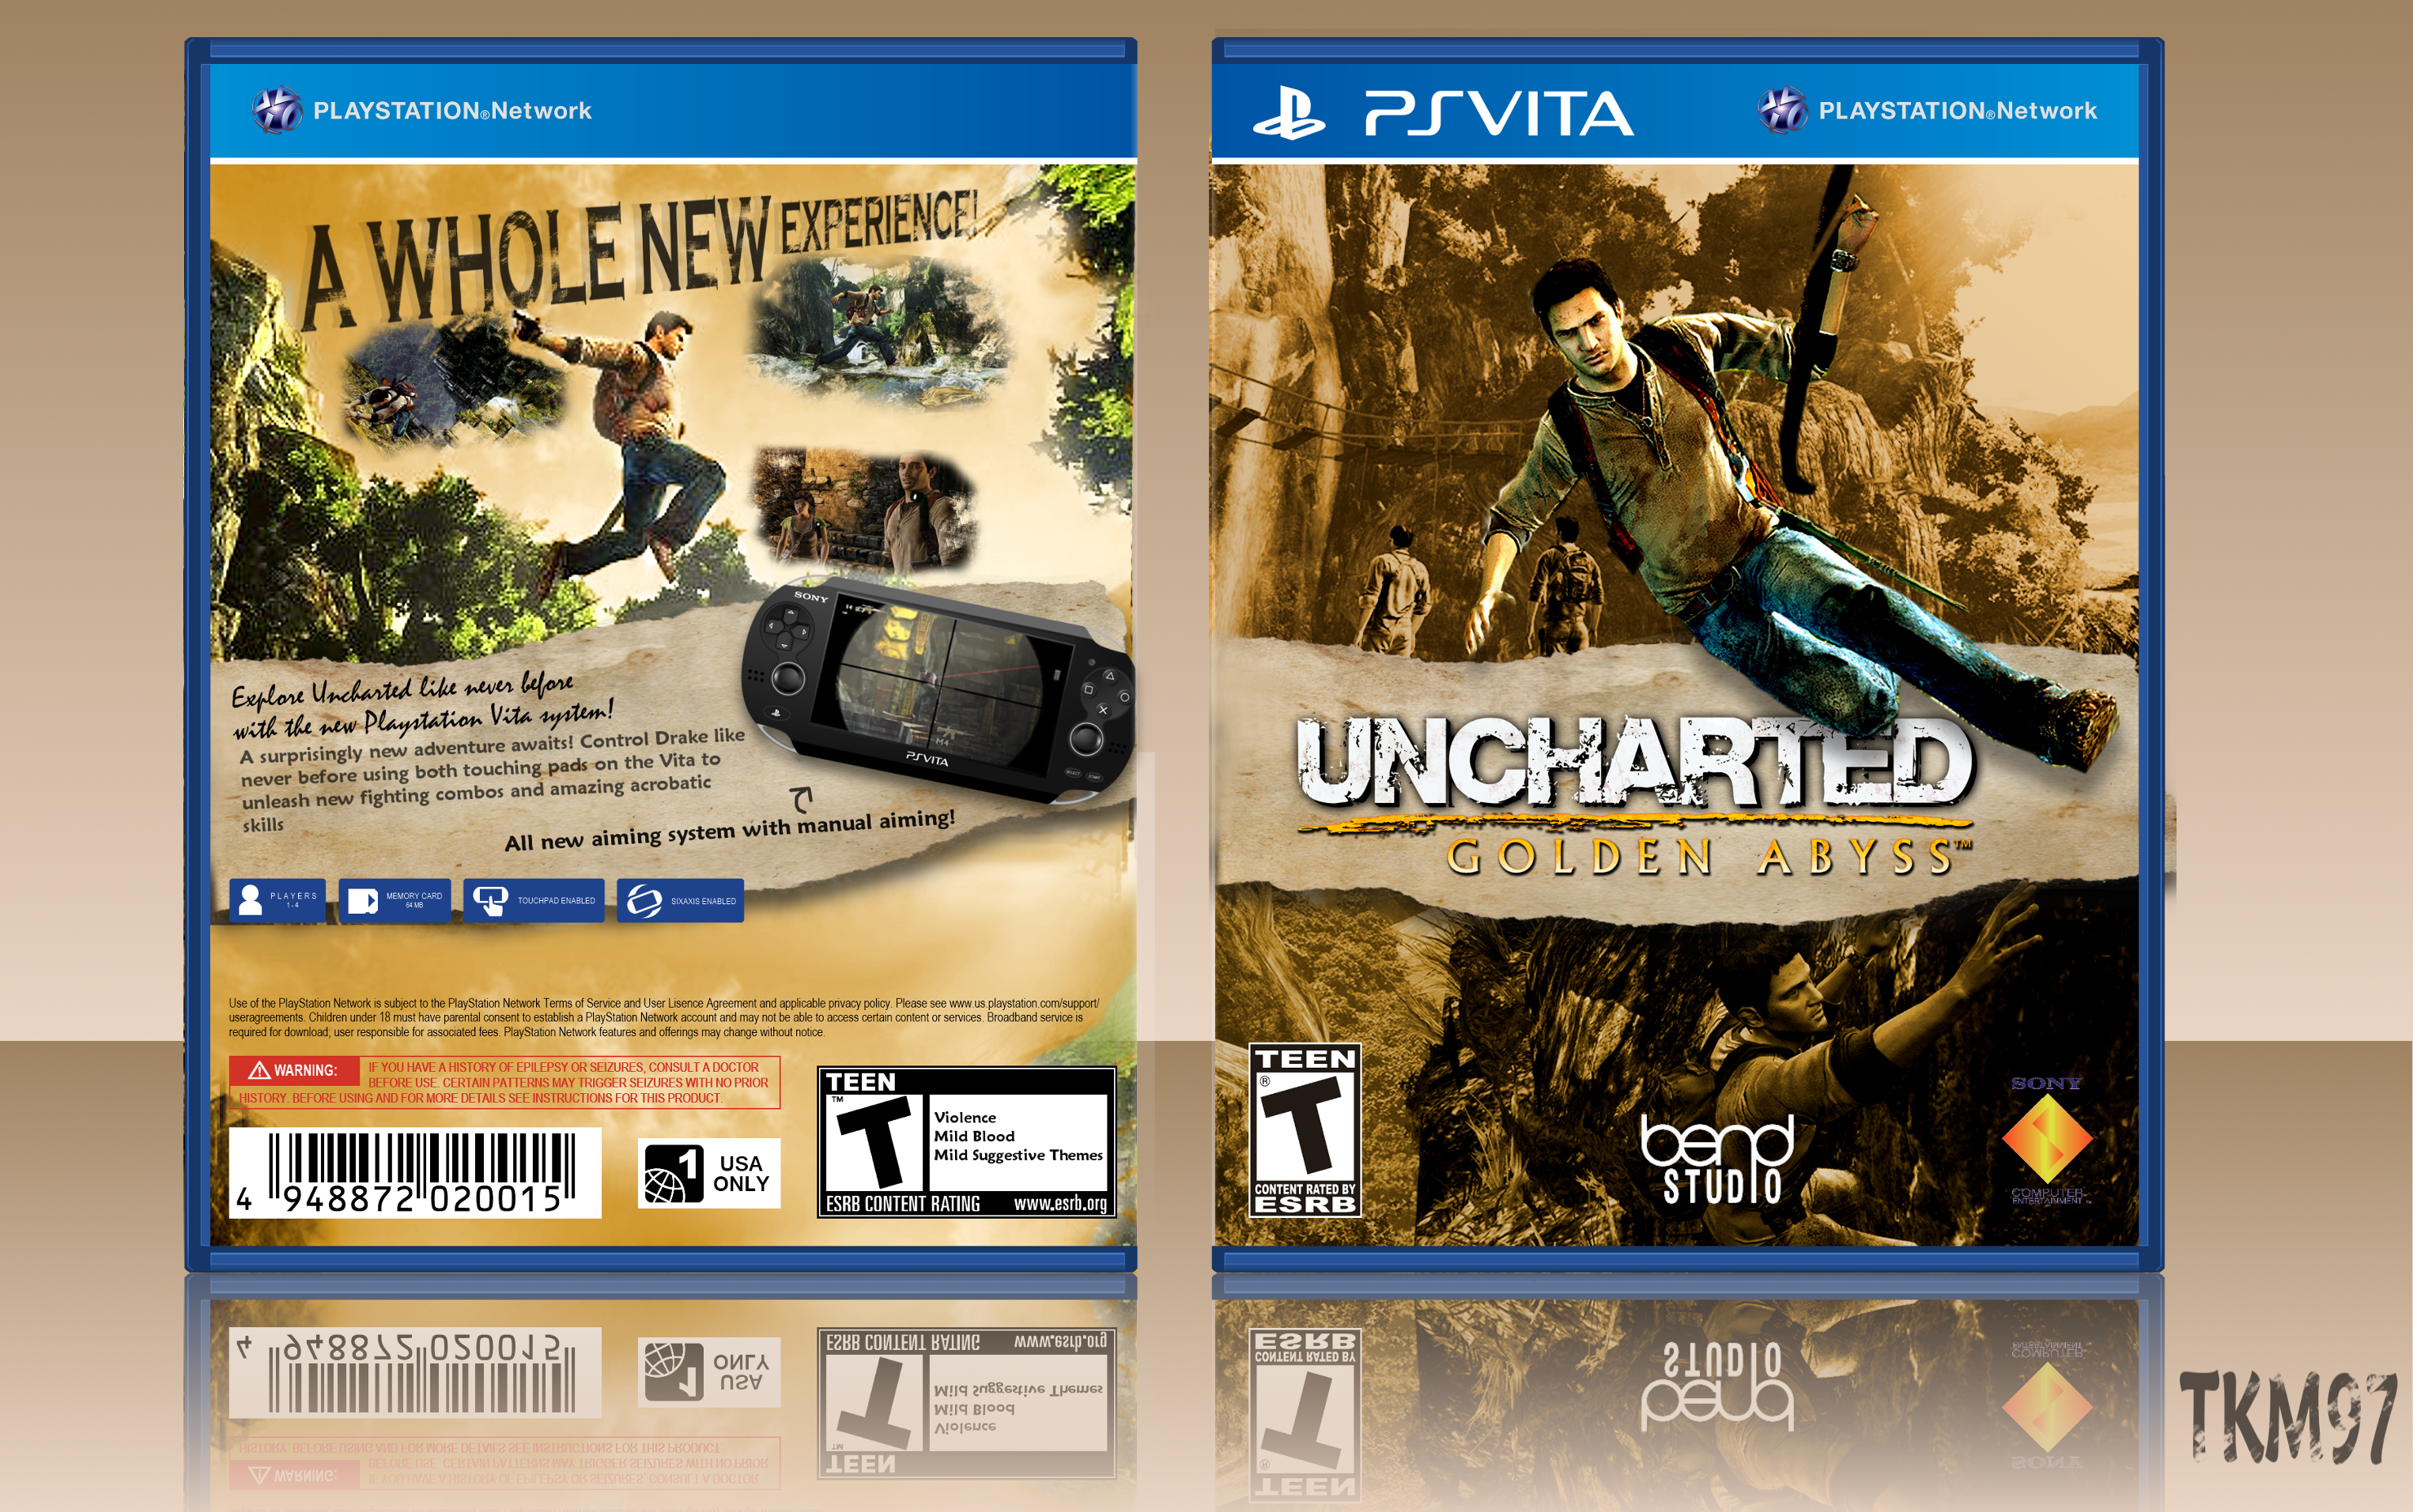 Uncharted: Golden Abyss box cover